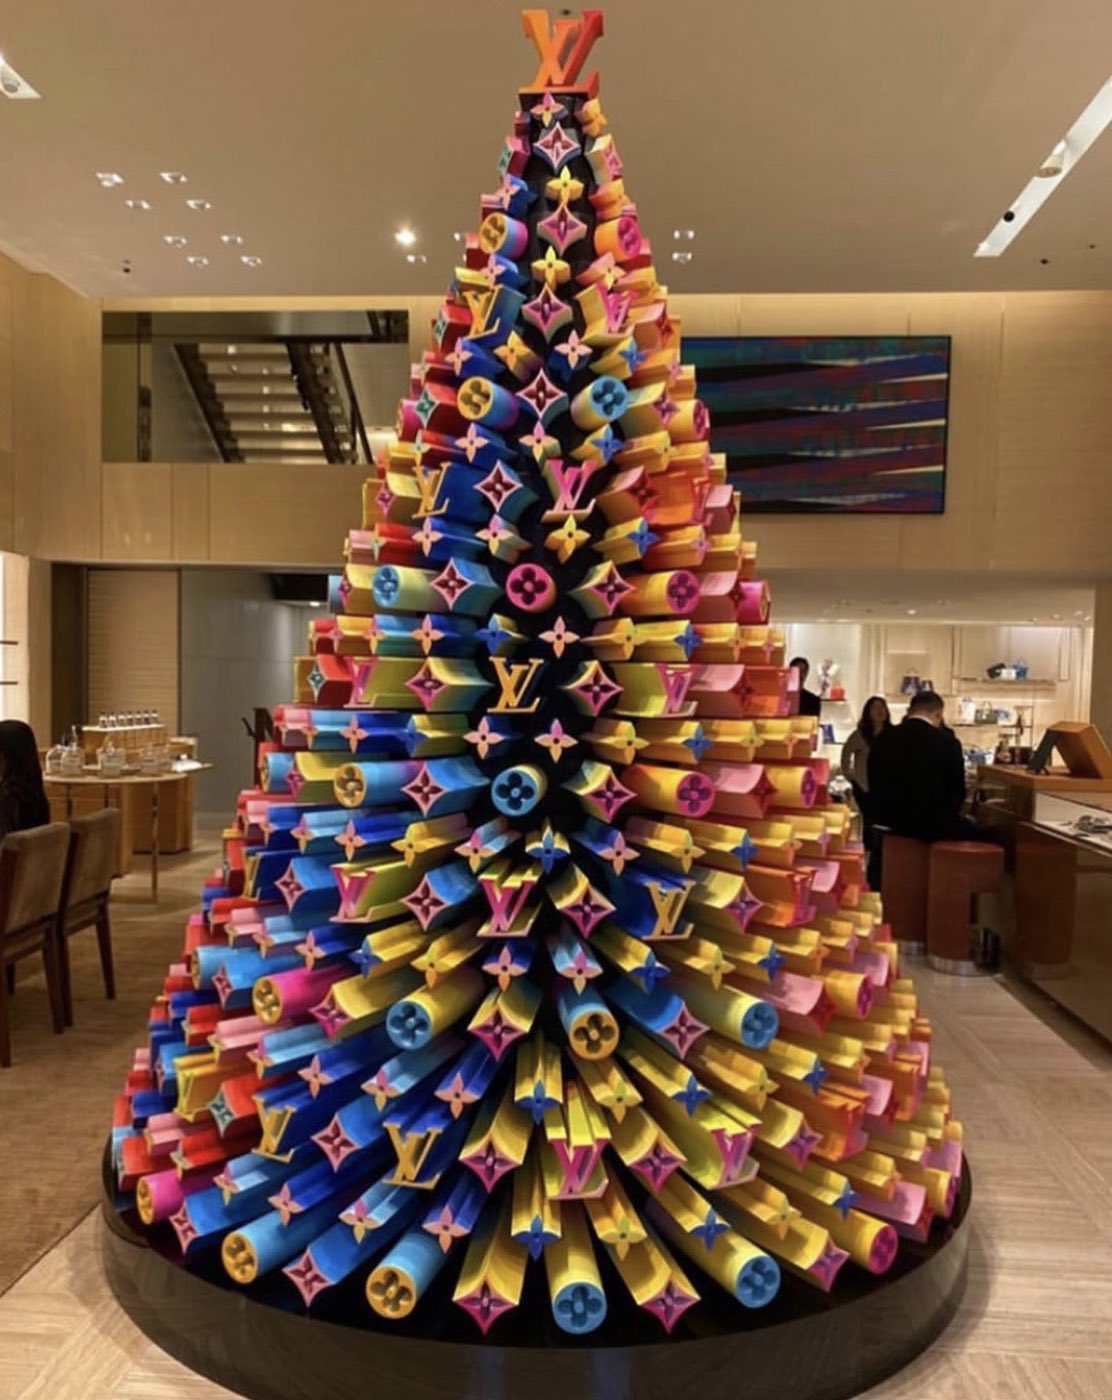 m ✨ on X: thinking about the louis vuitton christmas tree https